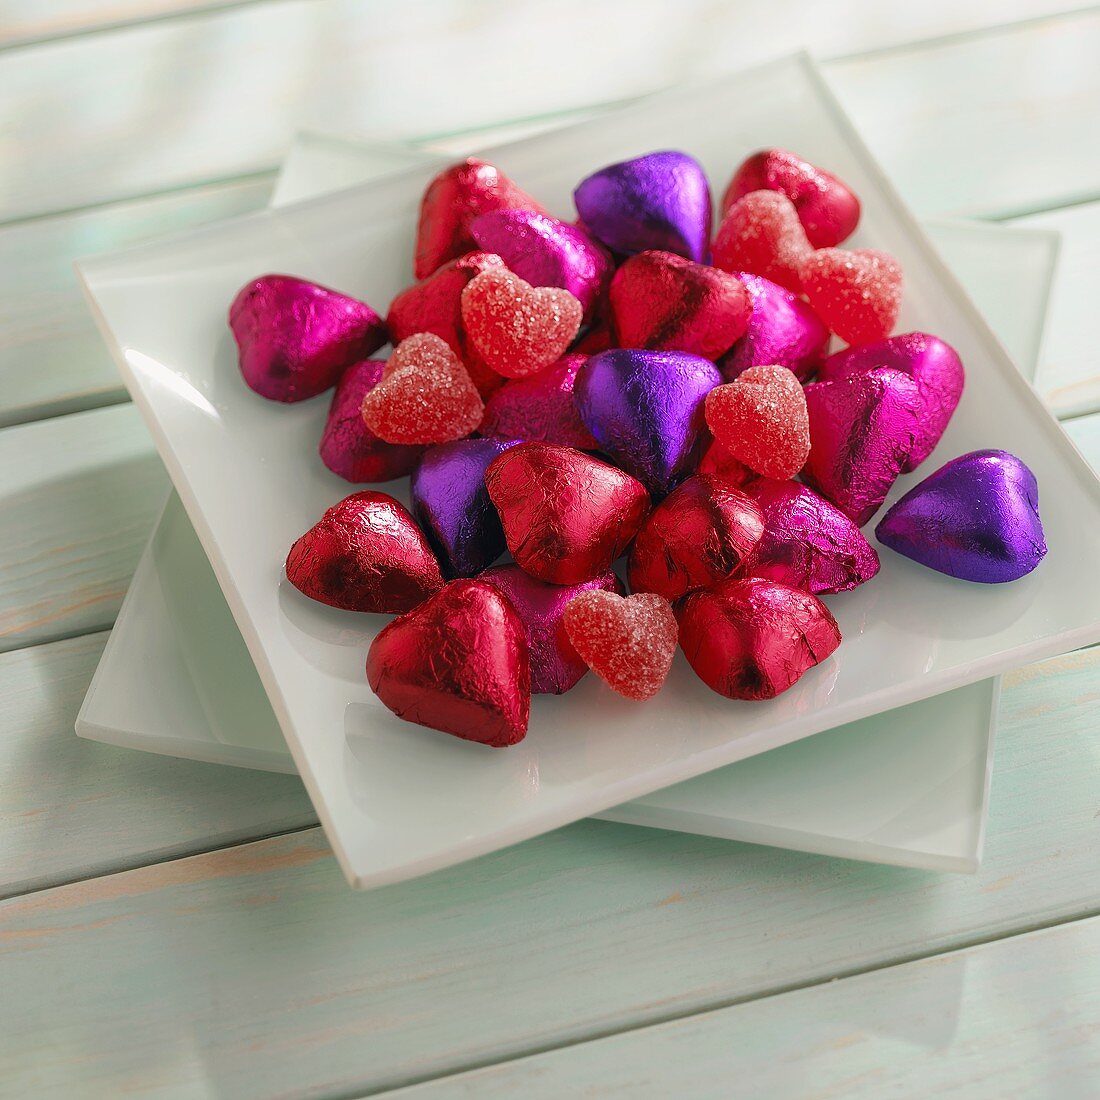 Chocolate Hearts Wrapped in Foil with Cinnamon Gumdrop Hearts